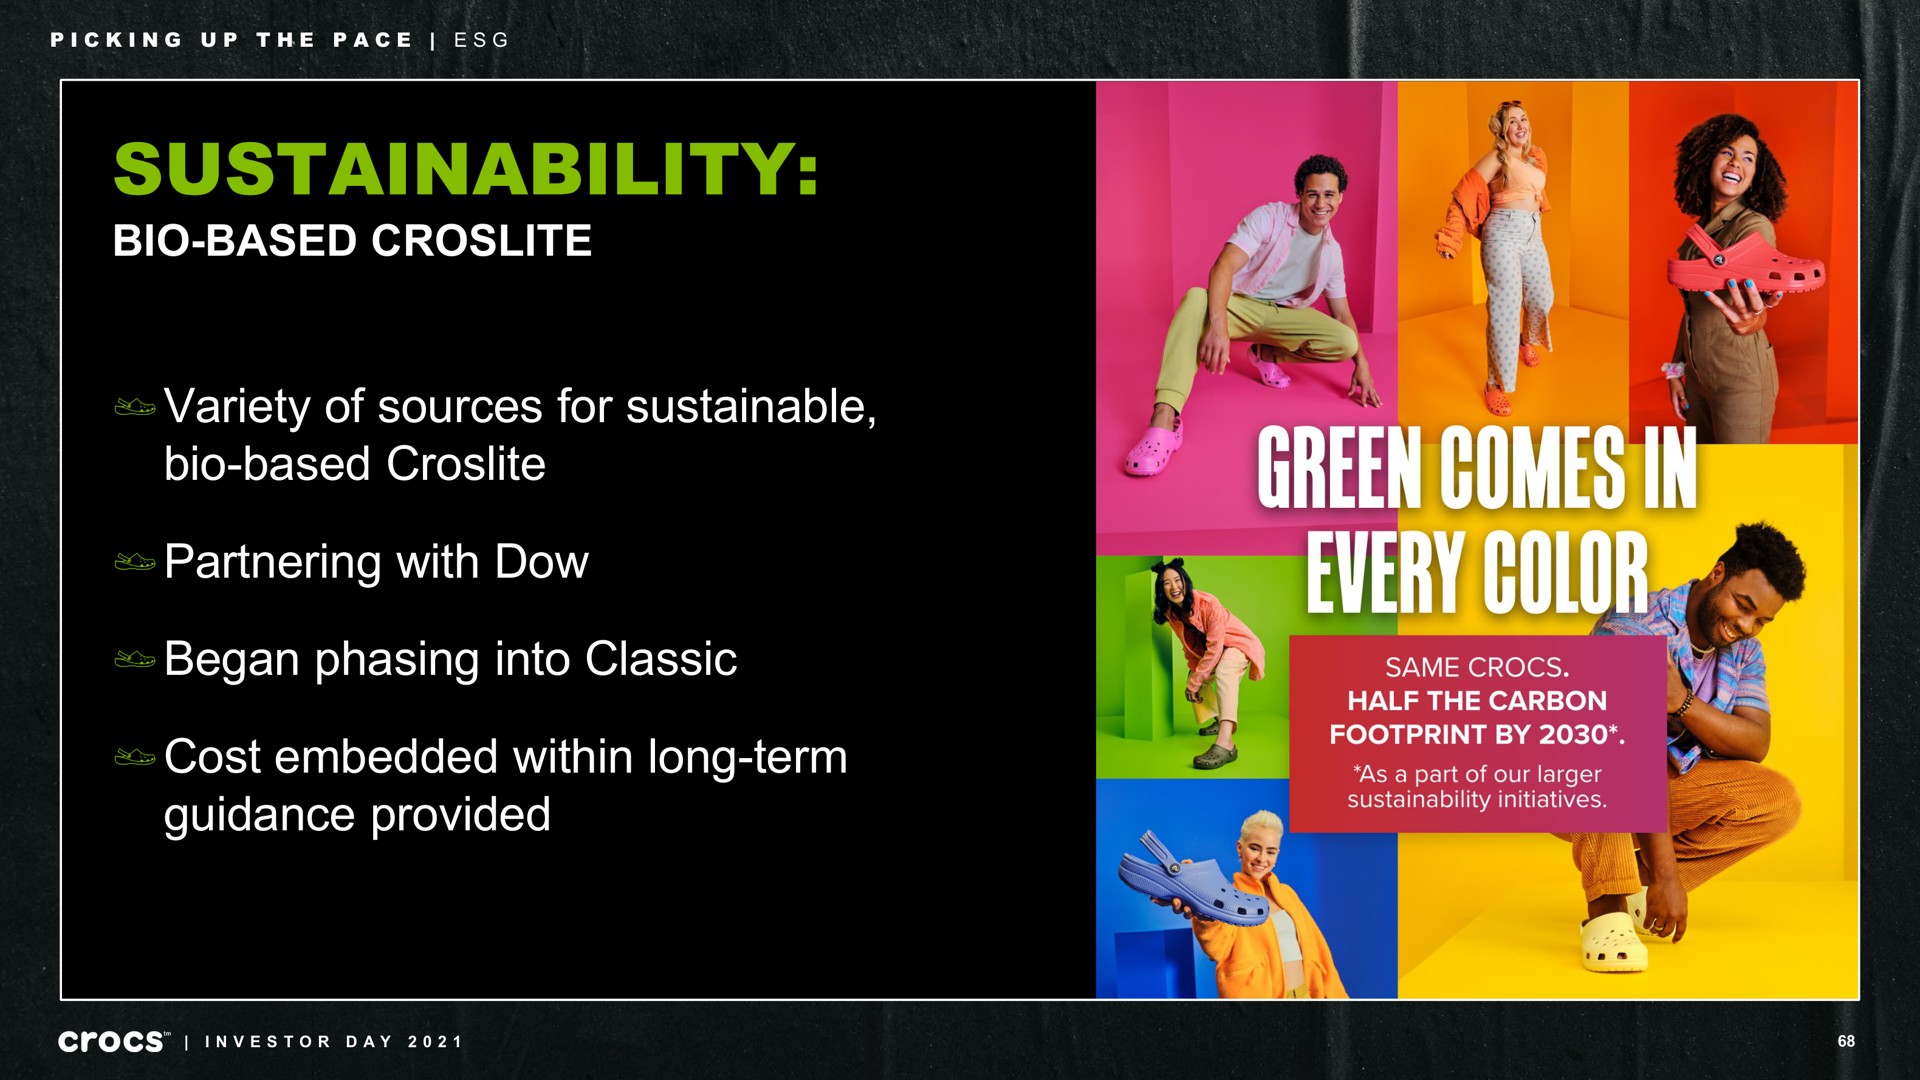 based variety of sources for sustainable based partnering with dow began phasing into classic cost embedded within long term guidance provided picking up the pace or be investor day i | Crocs